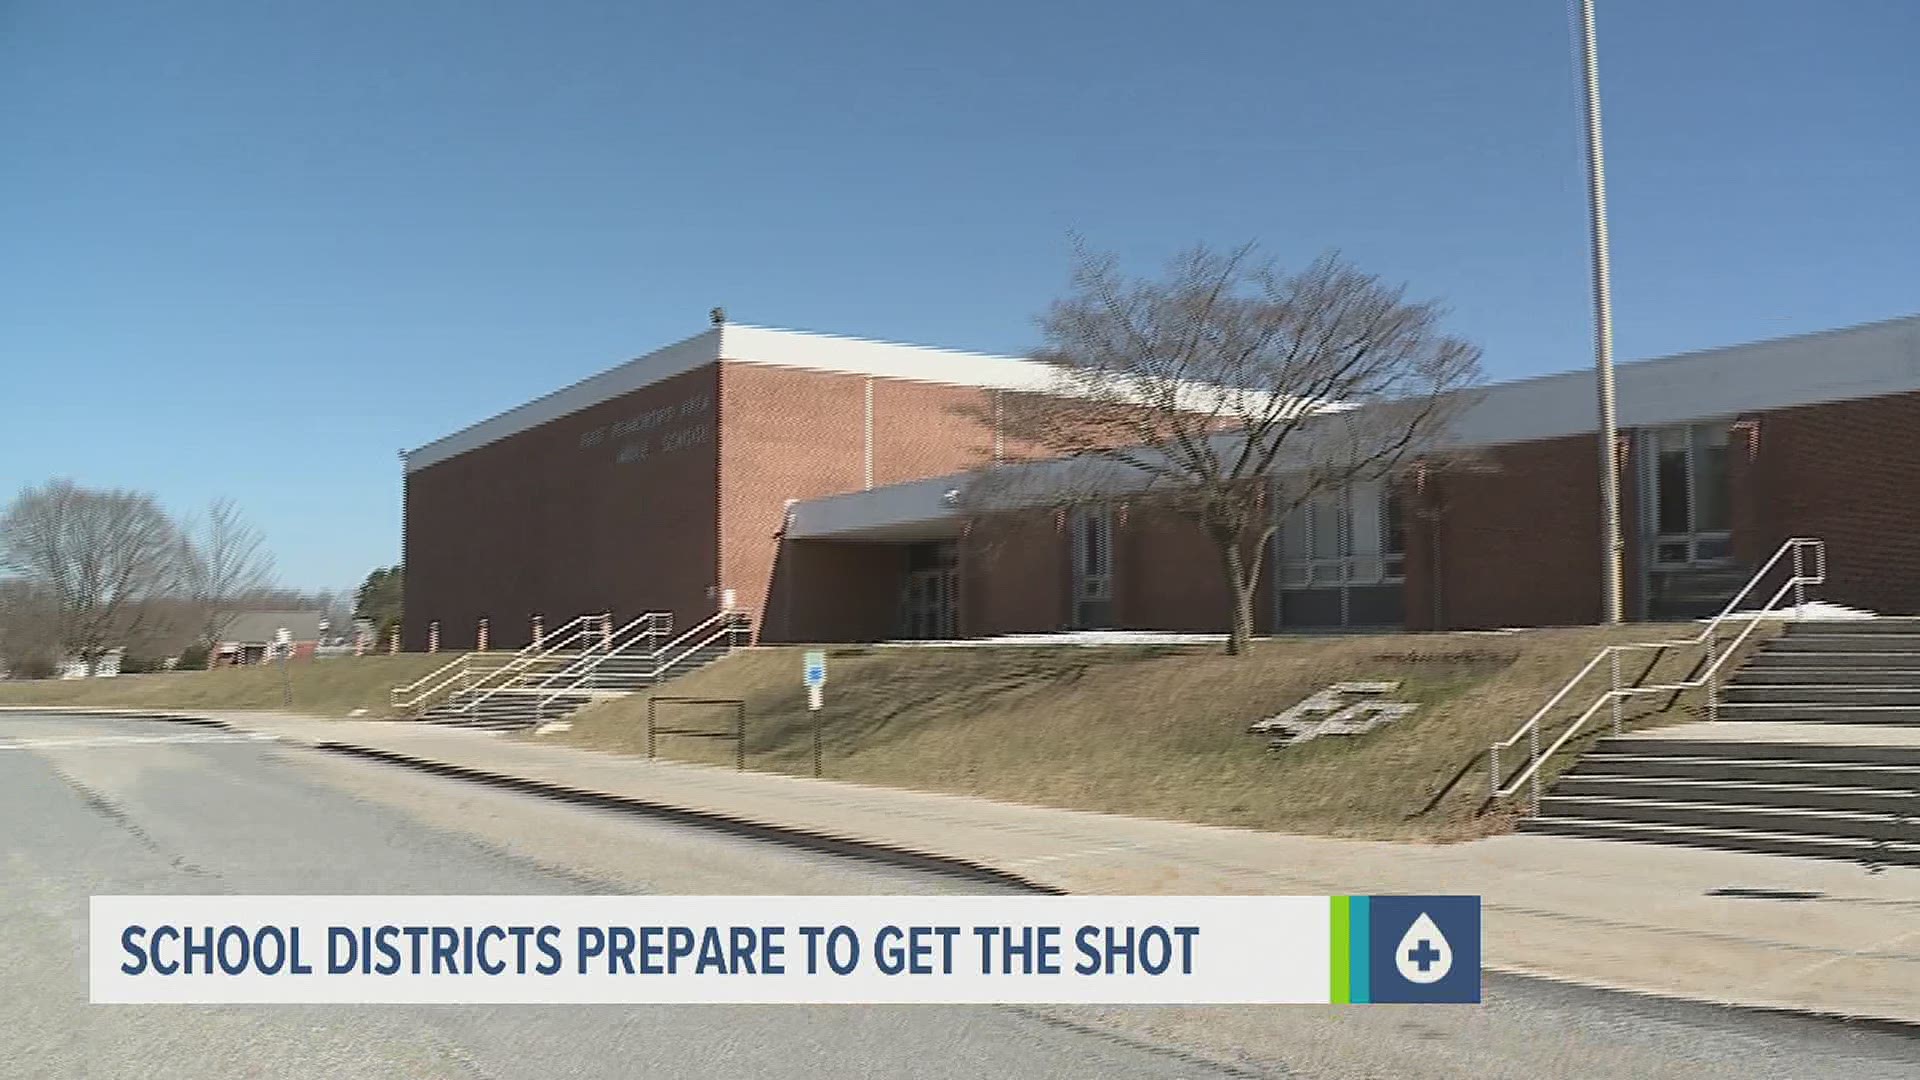 With not enough vaccine to go around, school staff will be prioritized for the Johnson & Johnson shot